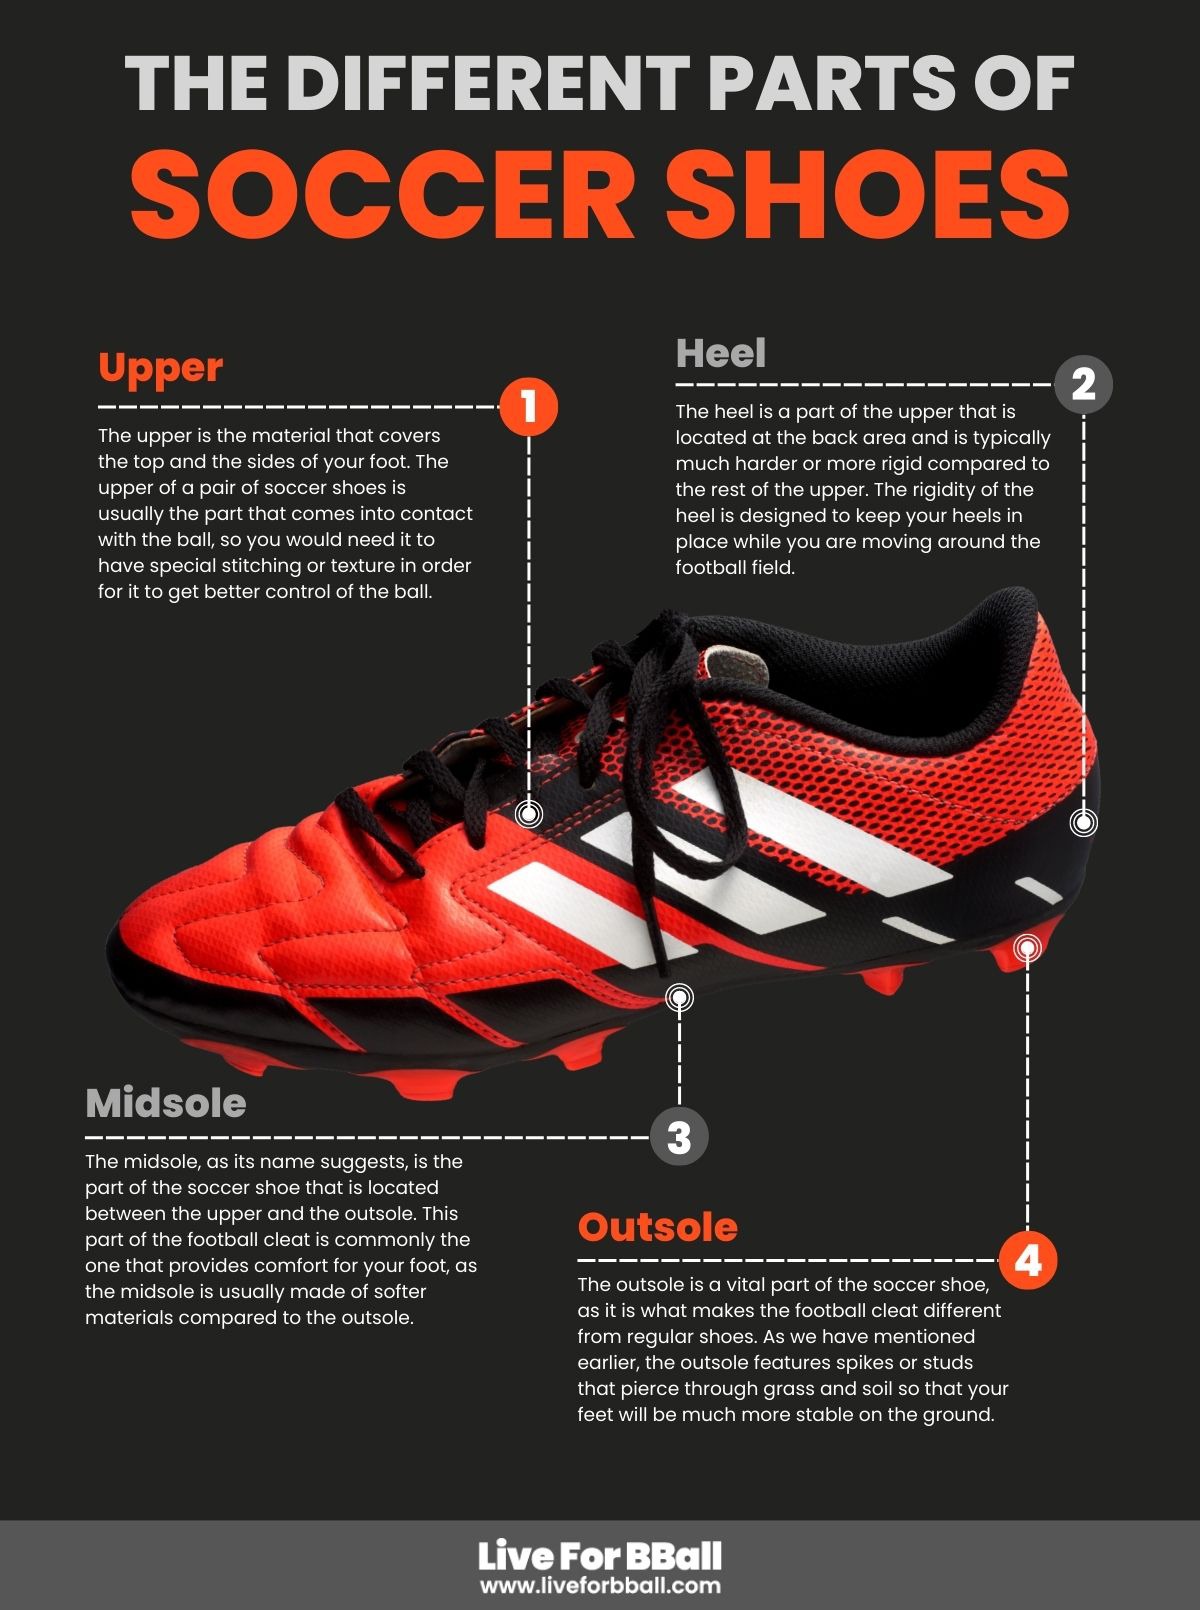 The Different Parts of Soccer Shoes